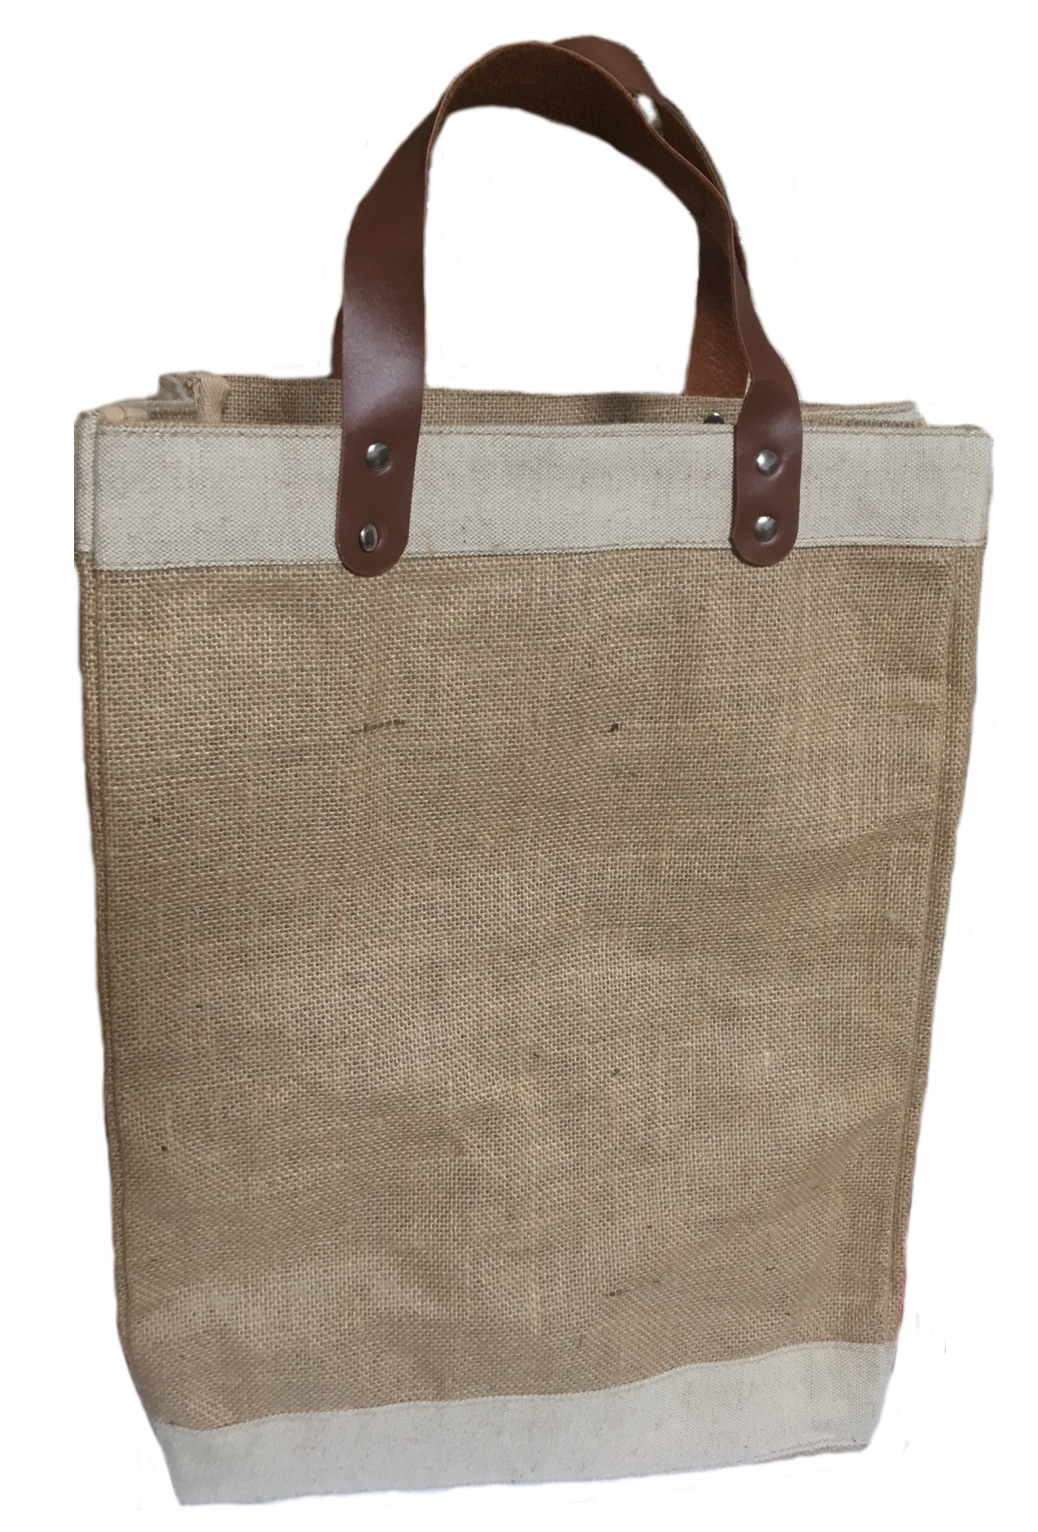 Jute Tote Bag With Faux Leather Handles 13"W x 18"H x 7.5"G